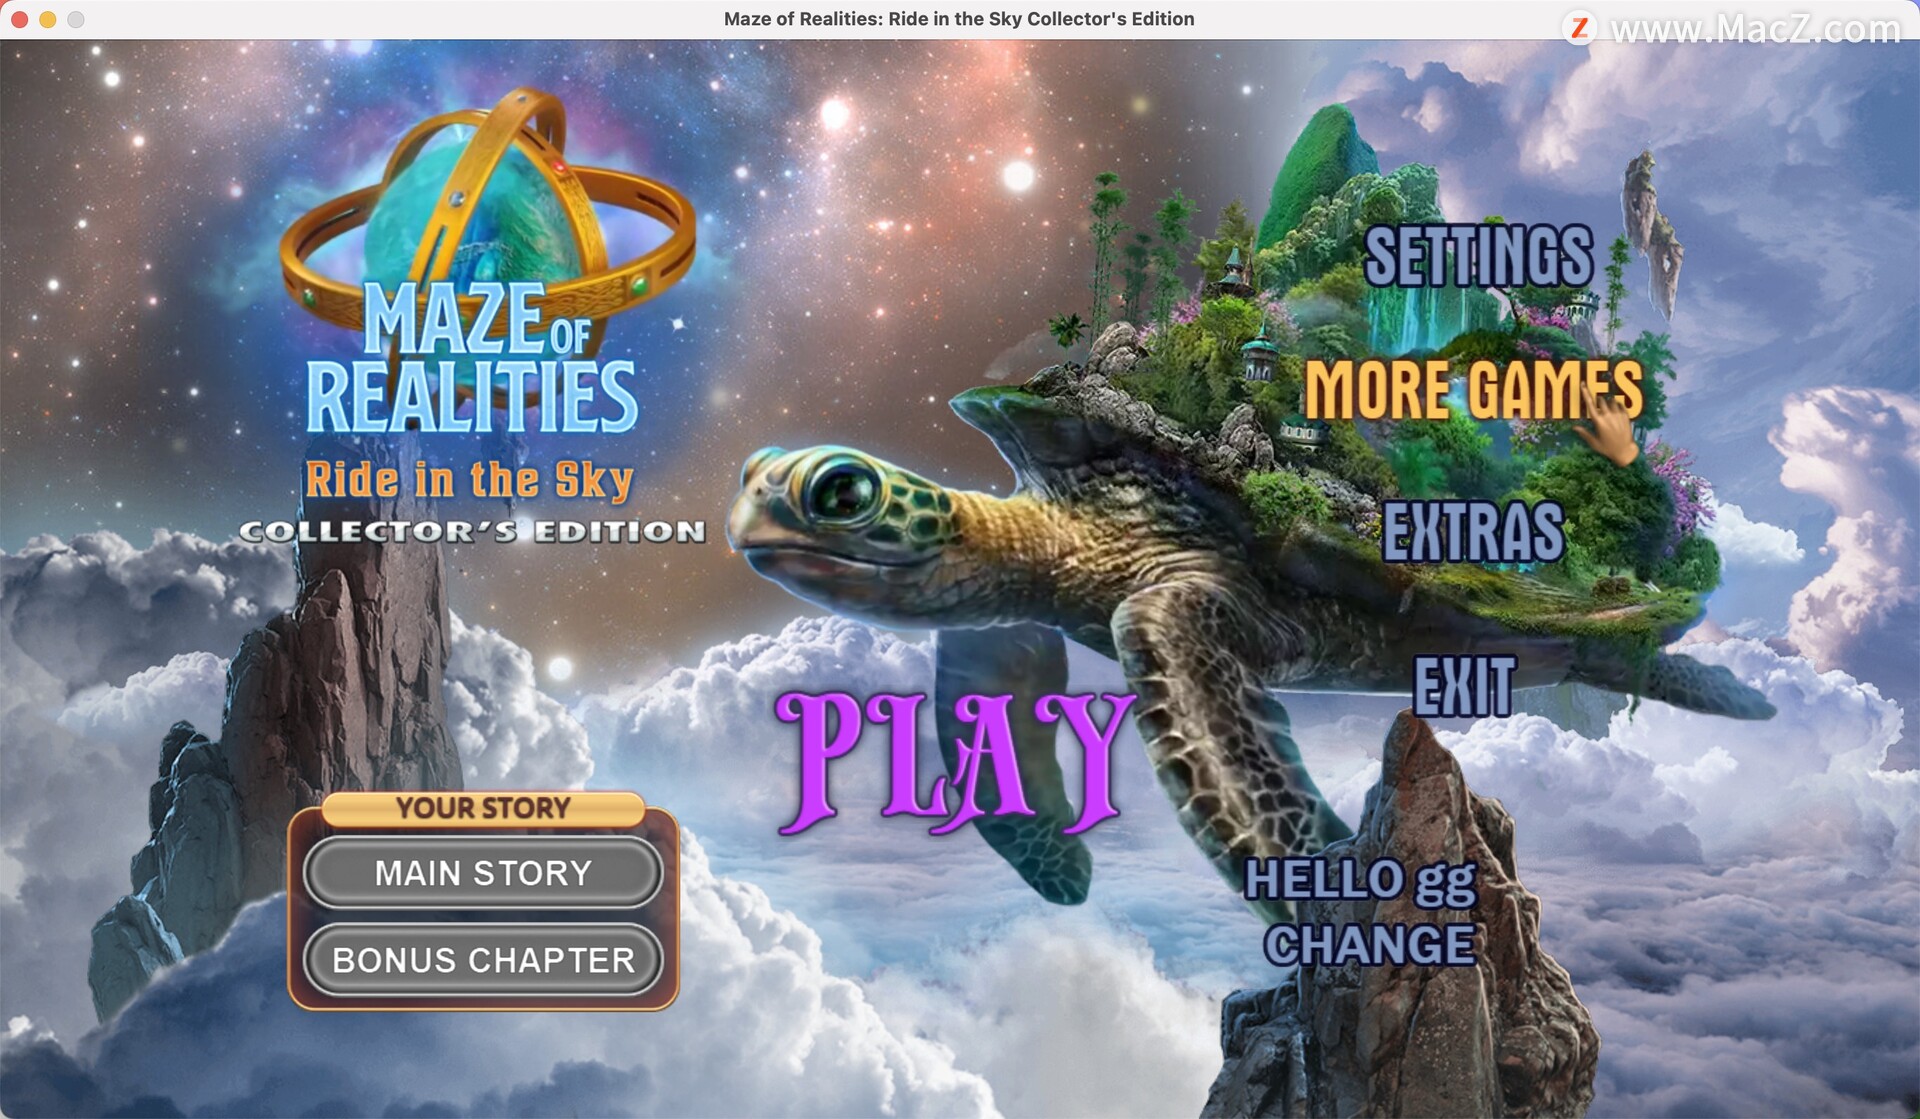 Maze of Realities: Ride in the Sky Collector‘s Edition mac(休闲解谜游戏)